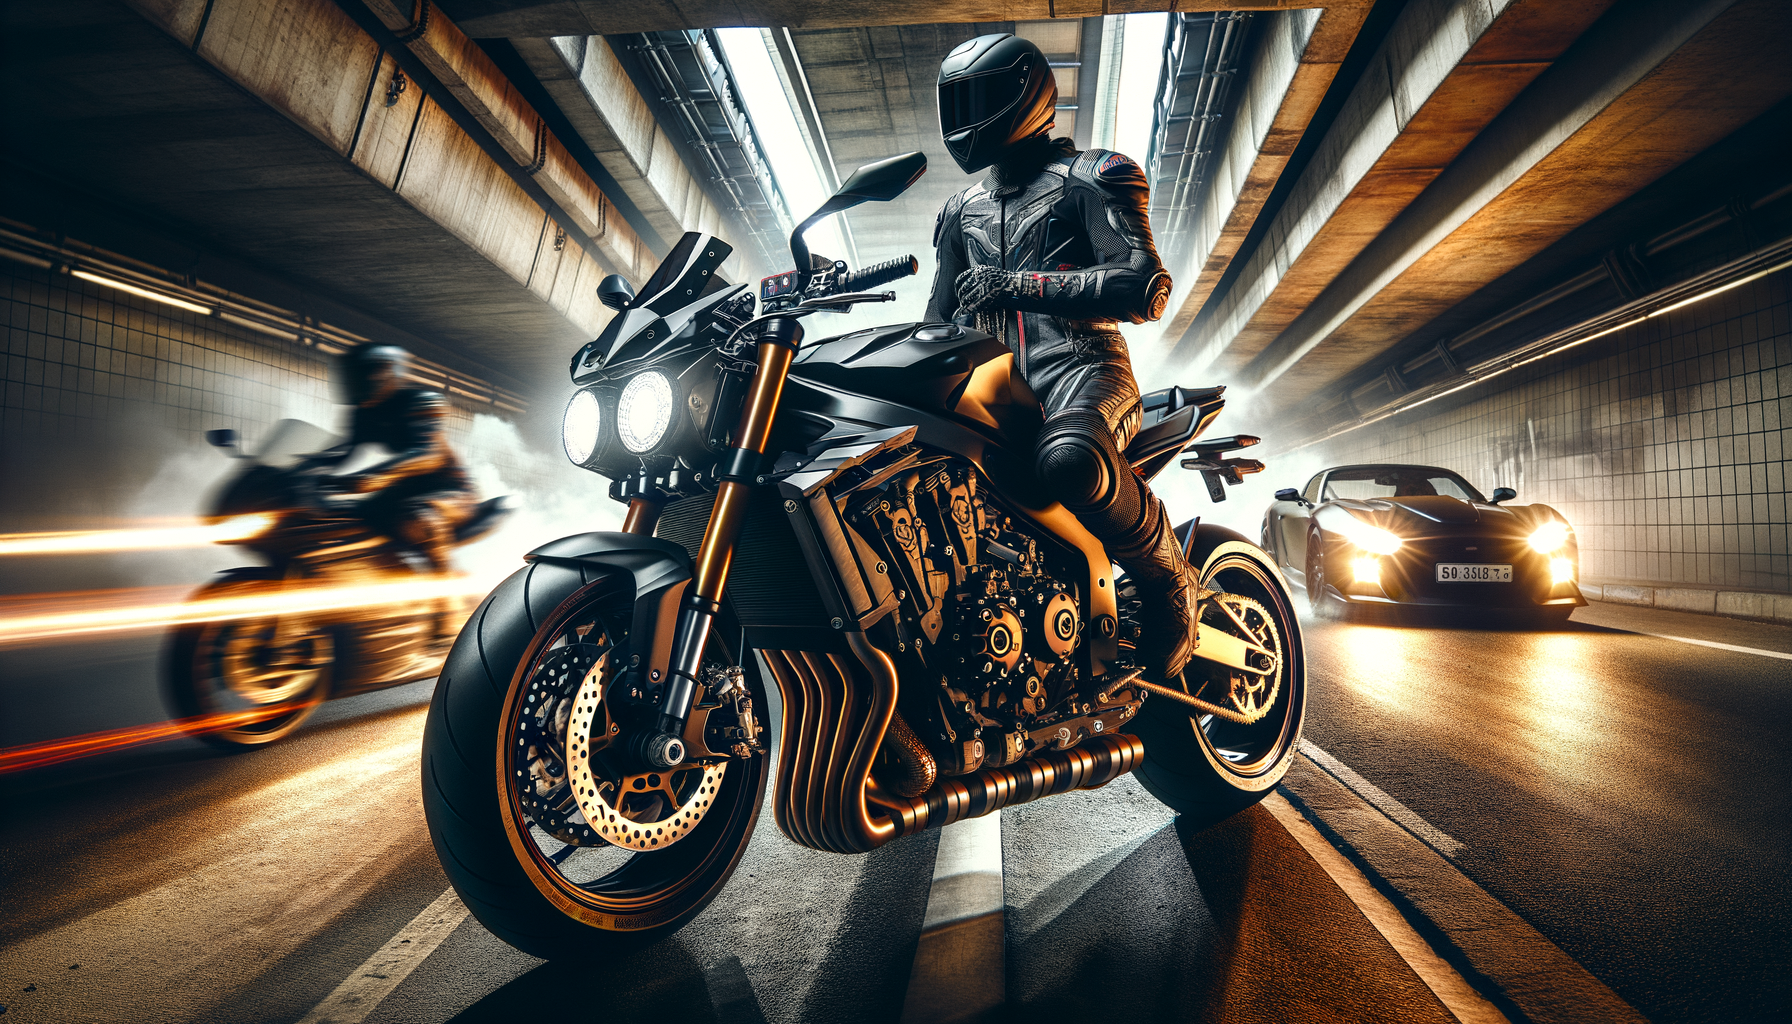 yamaha fz 150: a streetfighter's delight - explore the thrill of the streets with the yamaha fz 150, a powerful and agile streetfighter motorcycle designed to deliver an exhilarating ride experience.